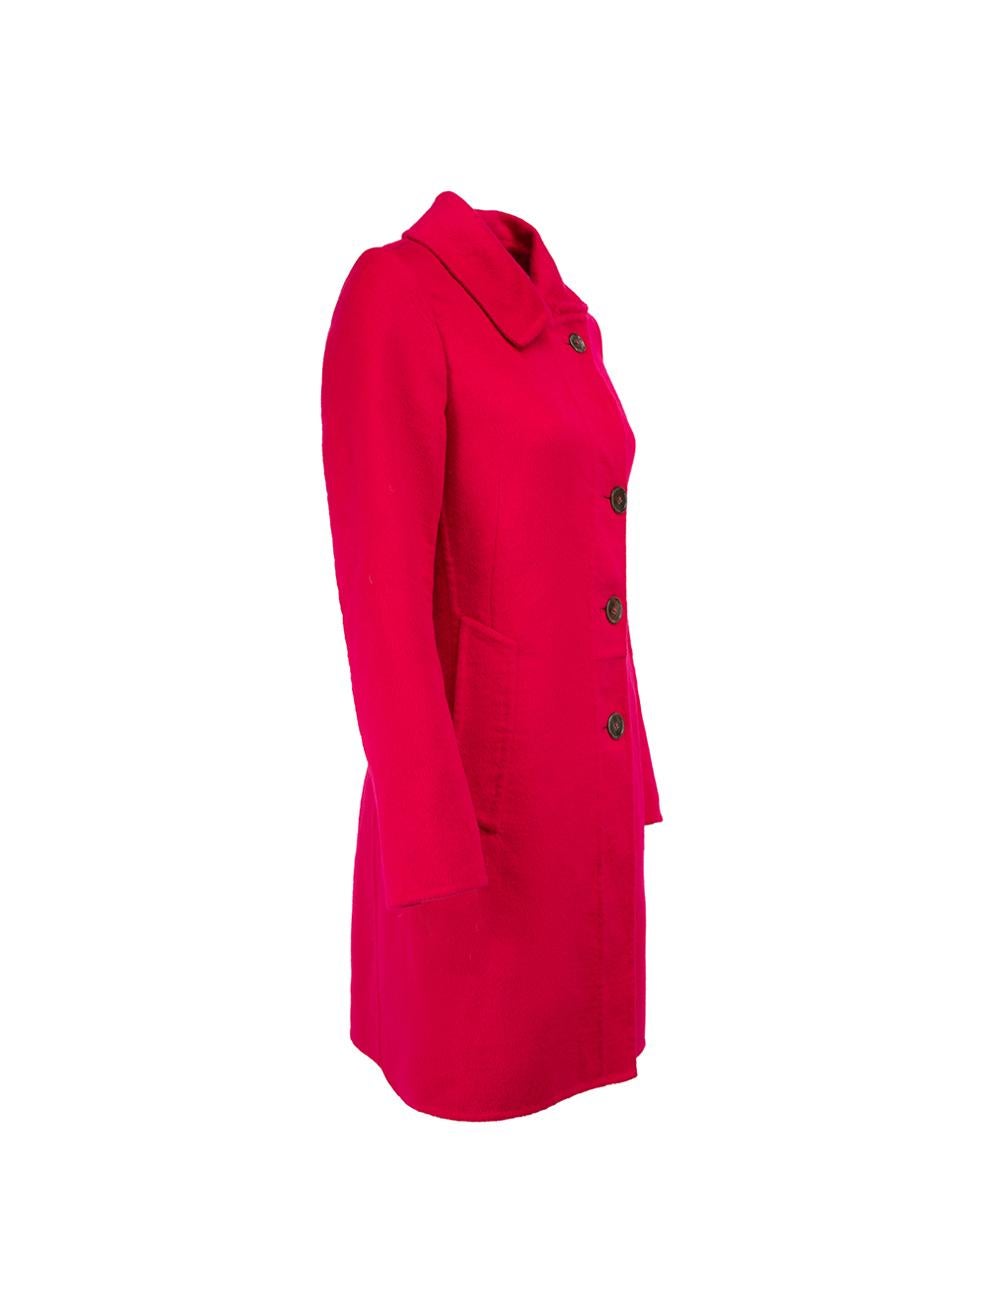 CONDITION is Very good. Minimal wear to coat is evident. Minimal wear to the rear neckline lining with discoloured mark on this used Jil Sander designer resale item.



Details


Fucshia pink

Wool

Mid length coat

Brushed texture

Single